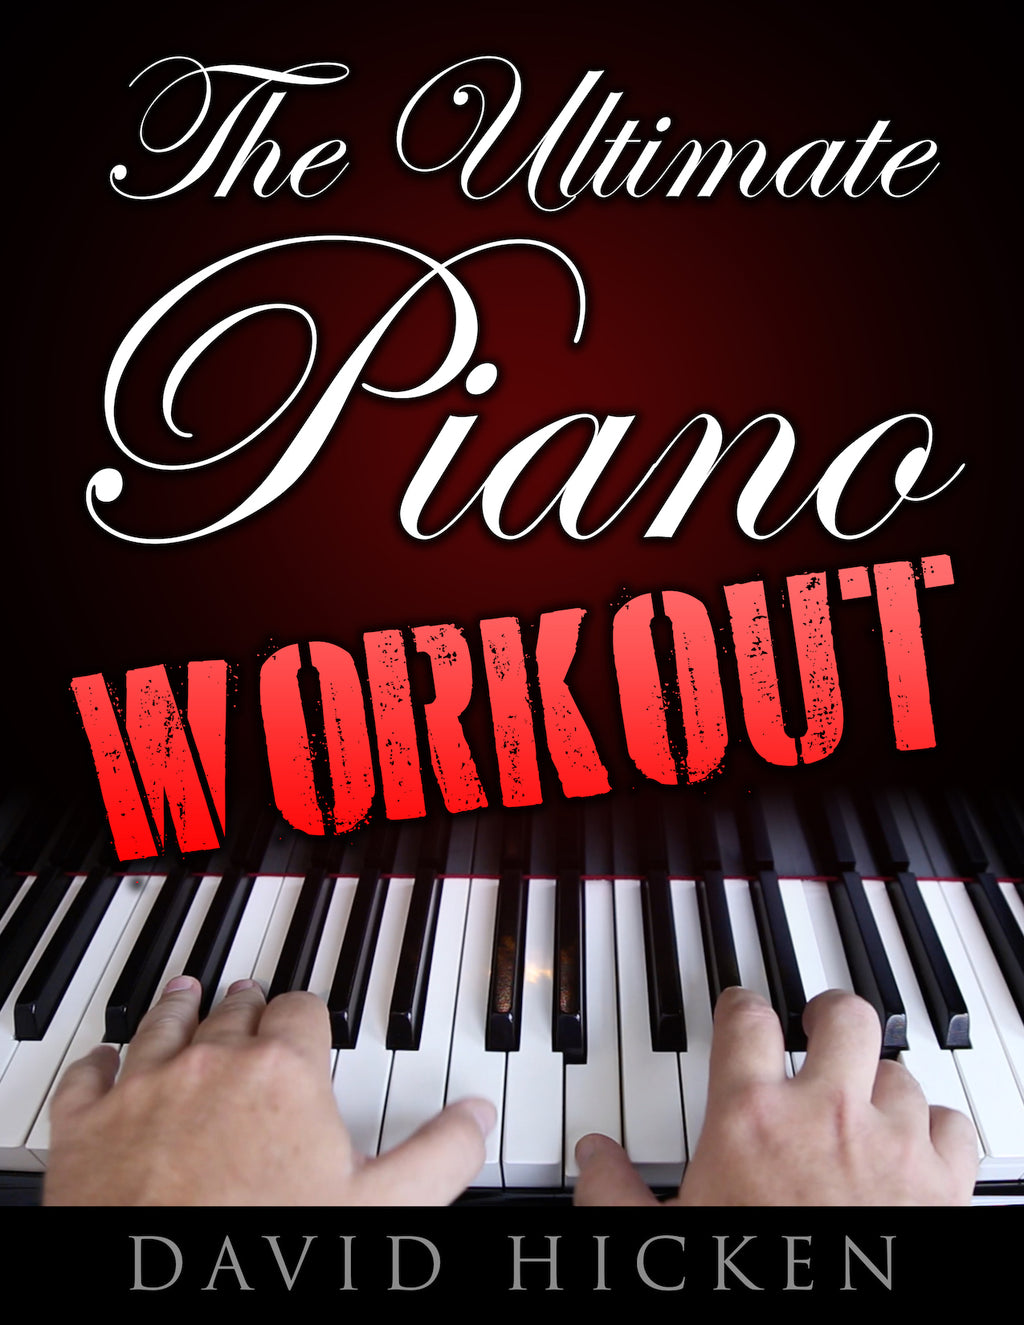 The Ultimate Piano Workout